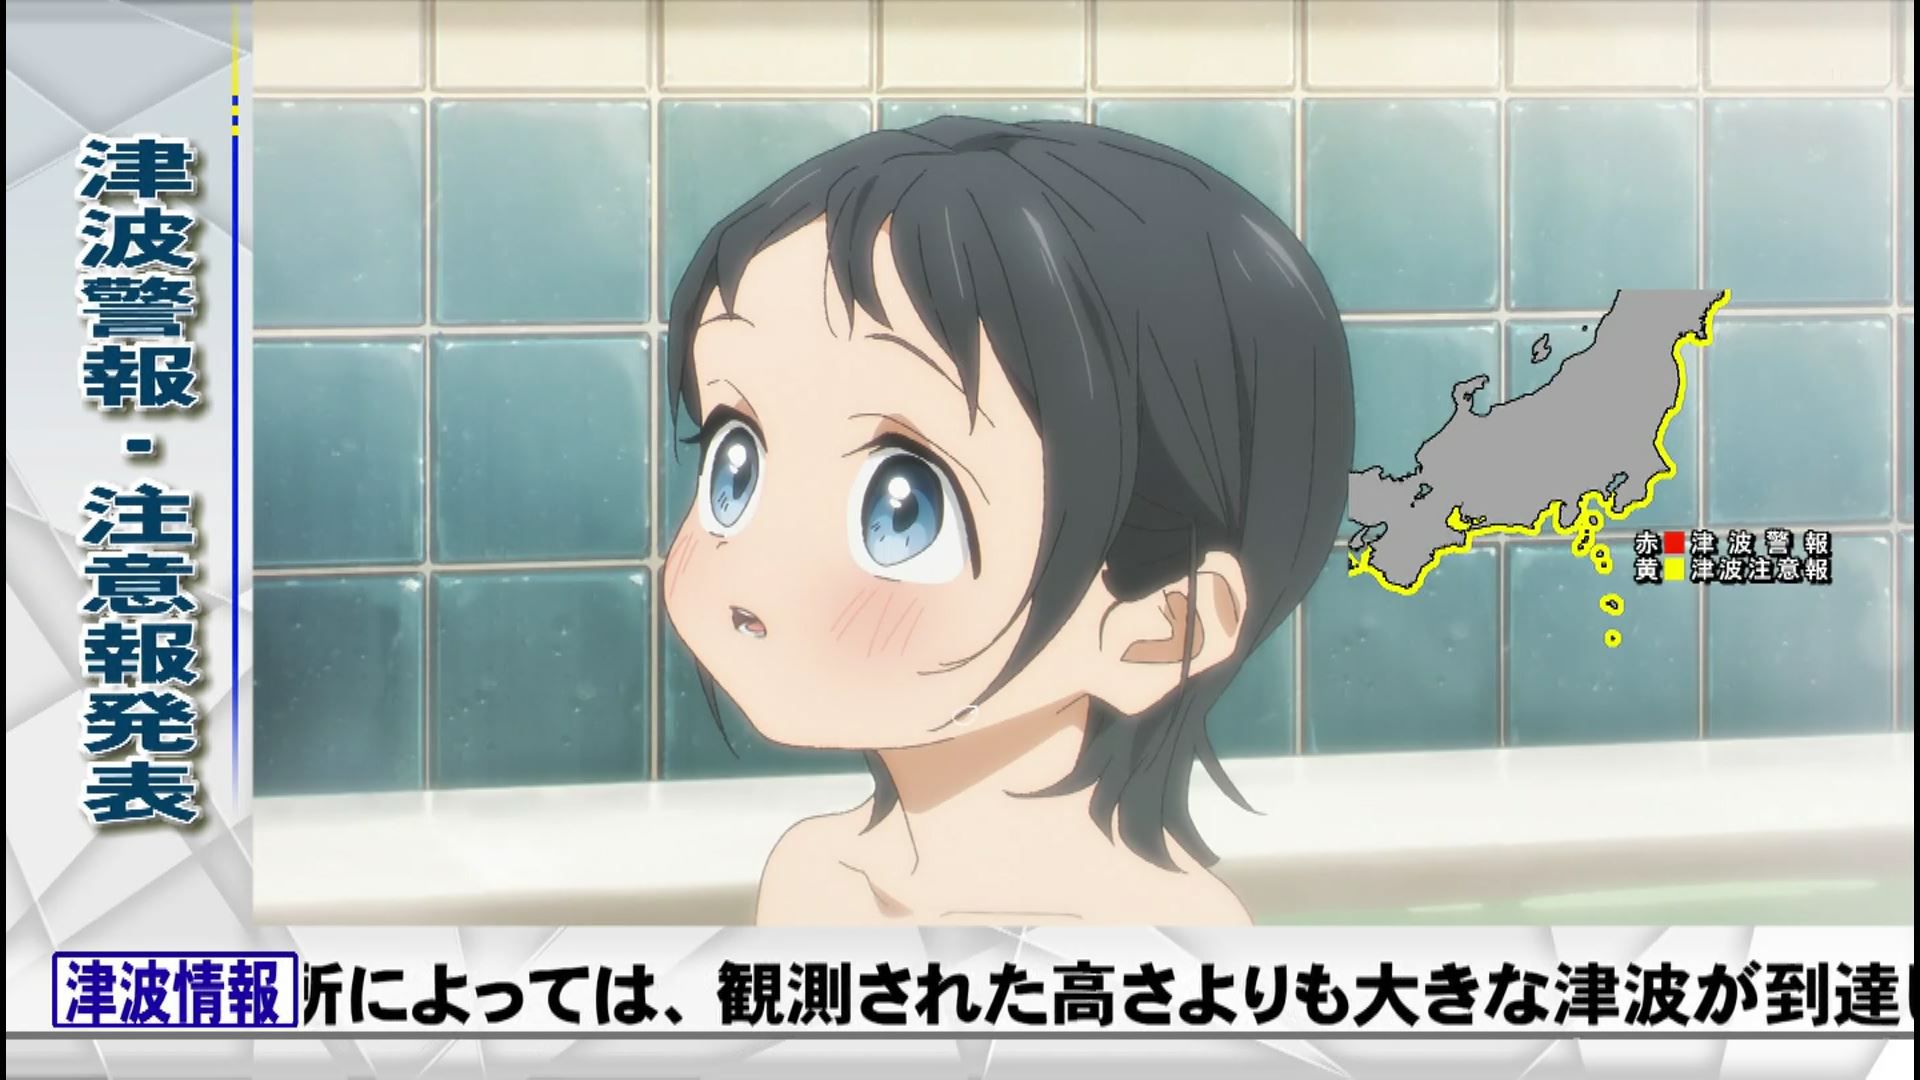 In the anime "Tomorrow-chan's Sailor Suit" episode 2, the girl's erotic bathing scene and the punchy scene 19